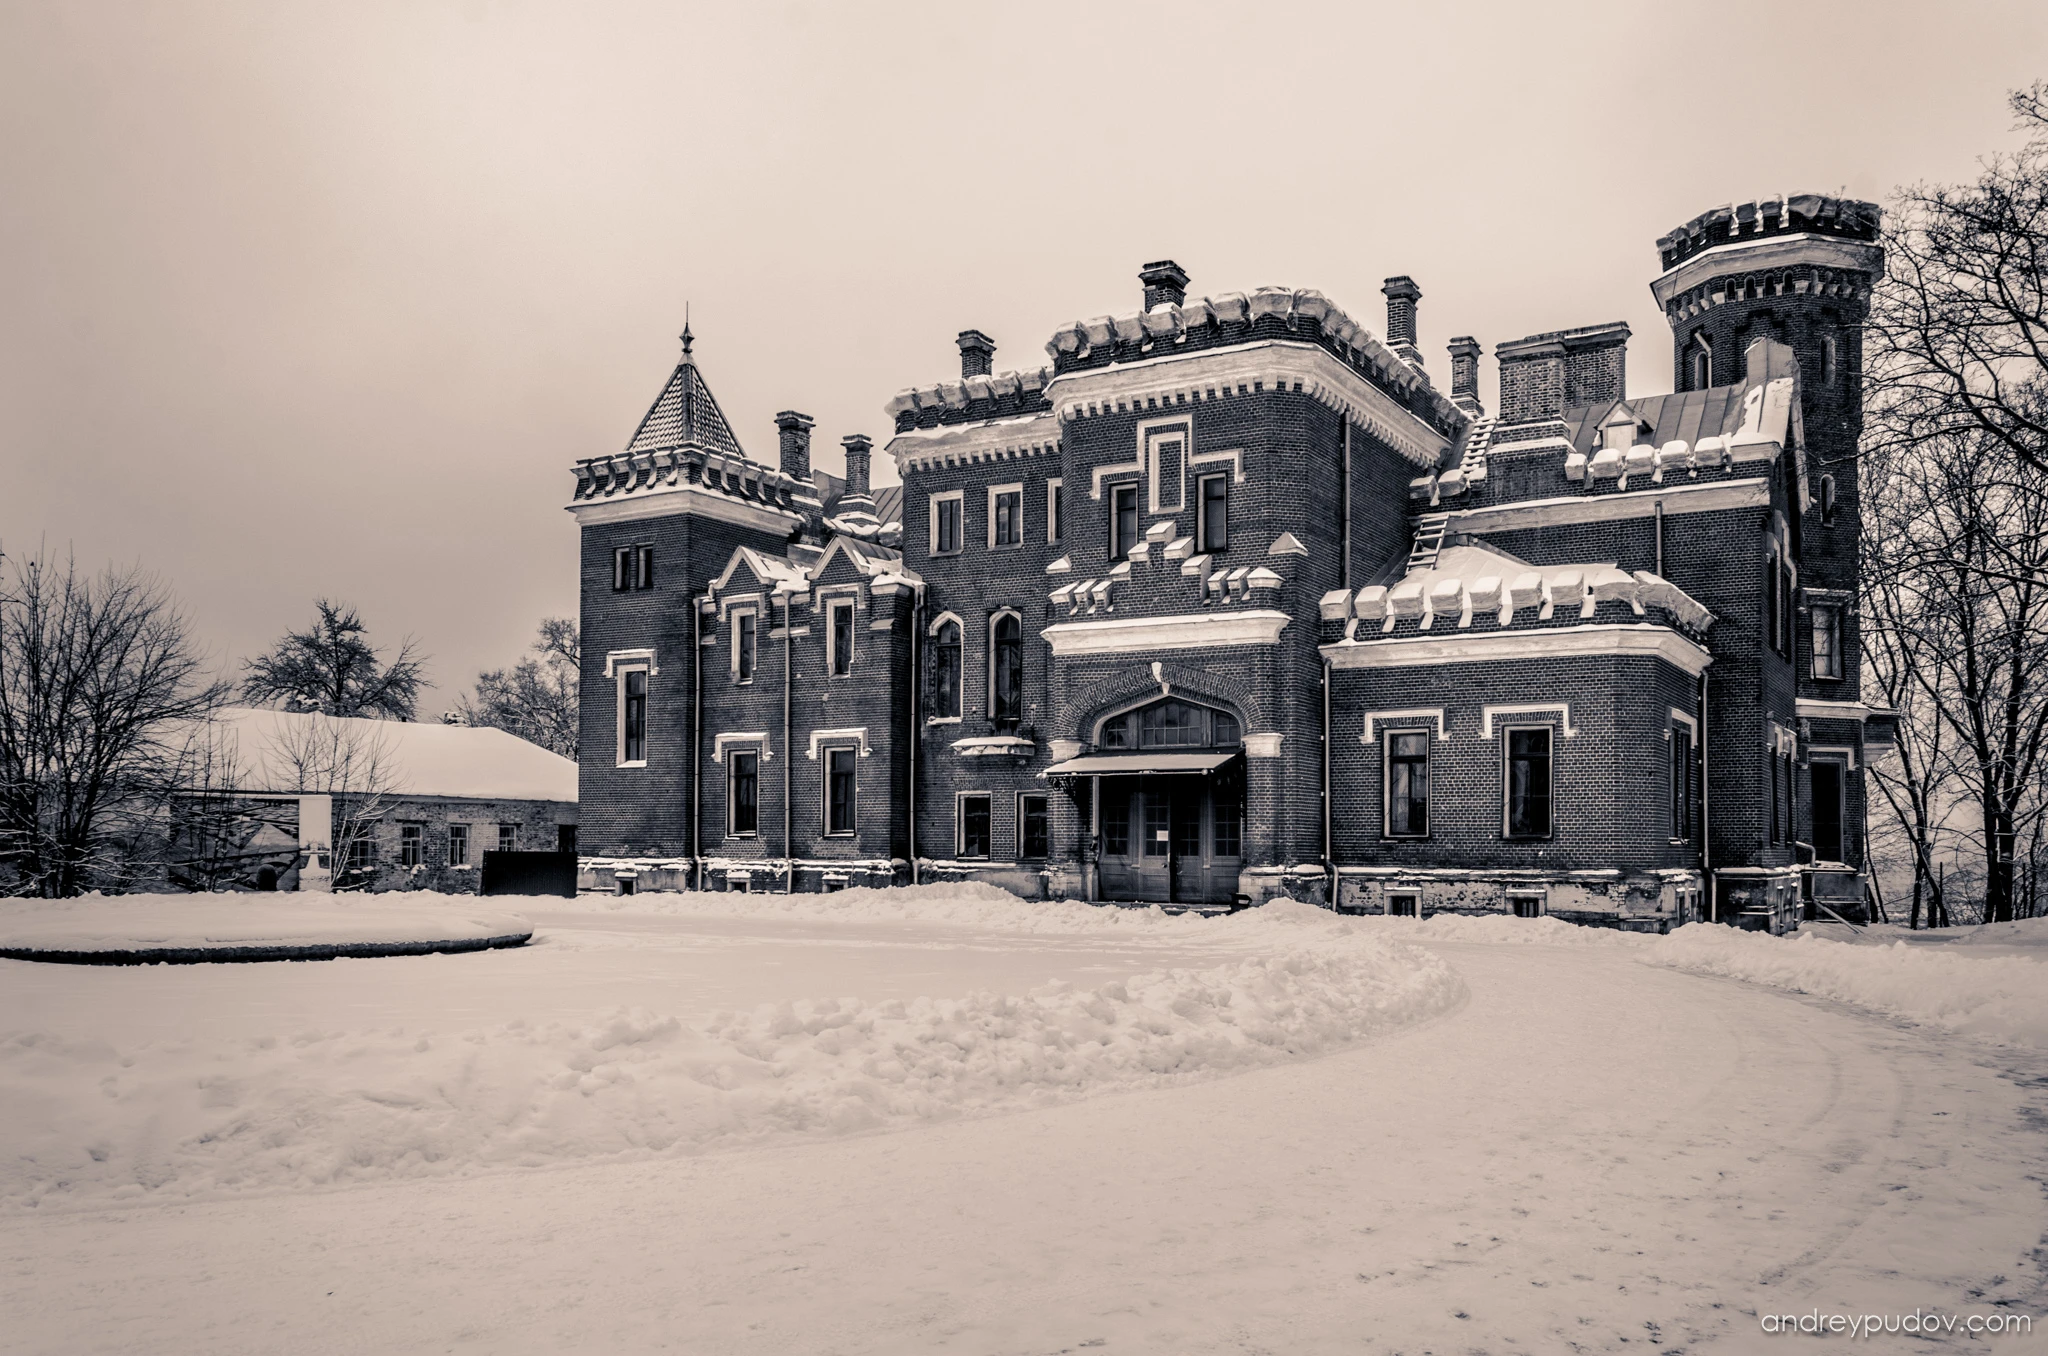 Ramon Palace - The palace was completed in 1887. After the marriage of Duke Peter Alexandrovich of Oldenburg, the couple's only son, to Grand Duchess Olga Alexandrovna, the young couple lived at the palace and then built their own home, Olgino, next to it.